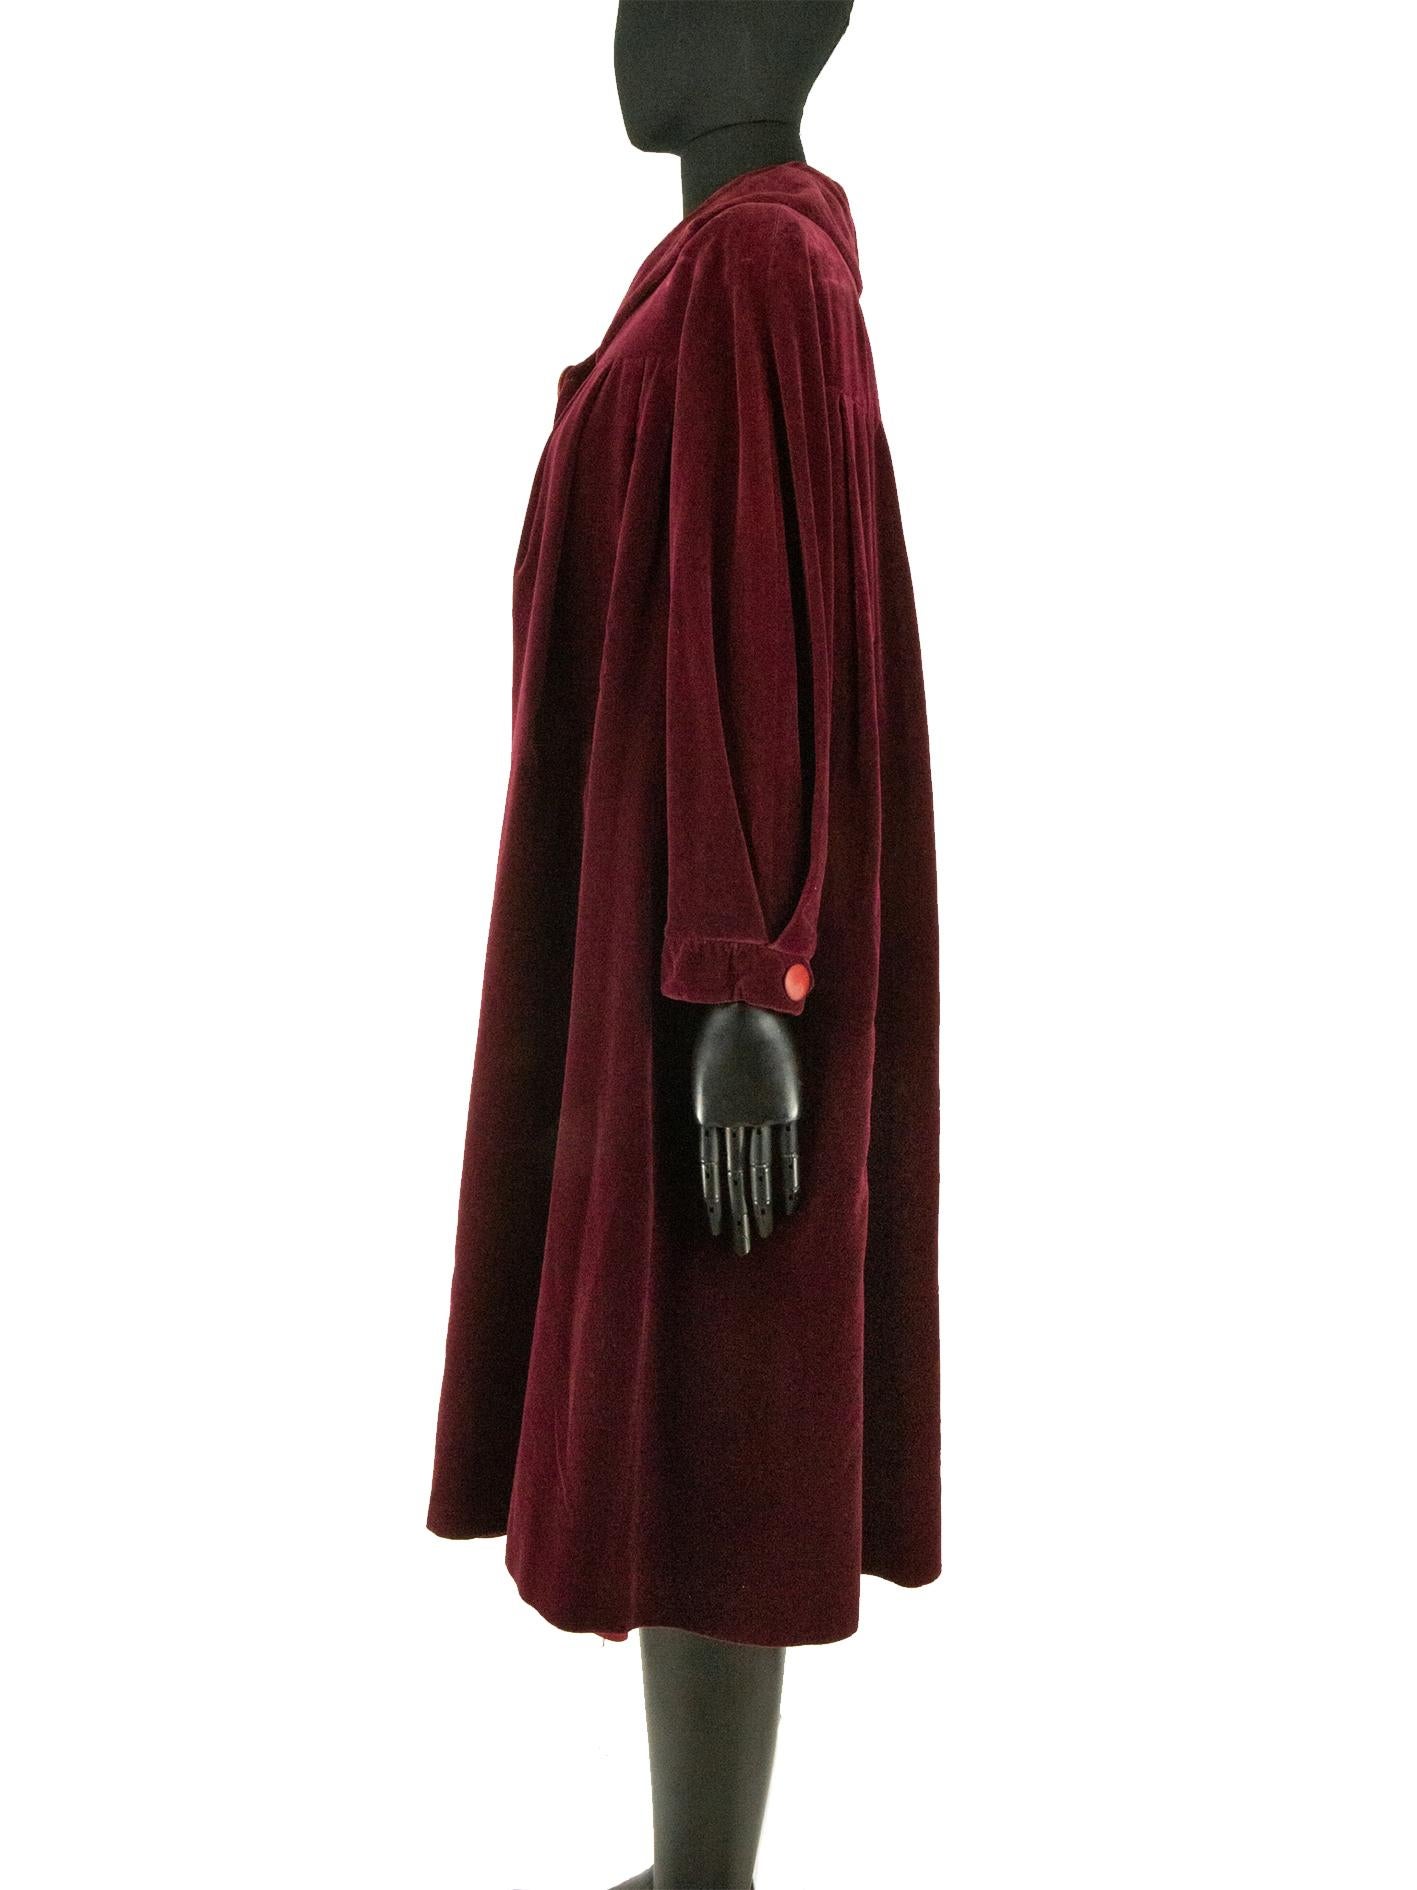 A burgundy red velvet cloak from Parisian couturier Lucile Manguin, daughter of impressionist painter Henry Manguin. The cloak is floor length and features softly pleated folded into the back and front yoke. The sleeves are pleated into the cuff,